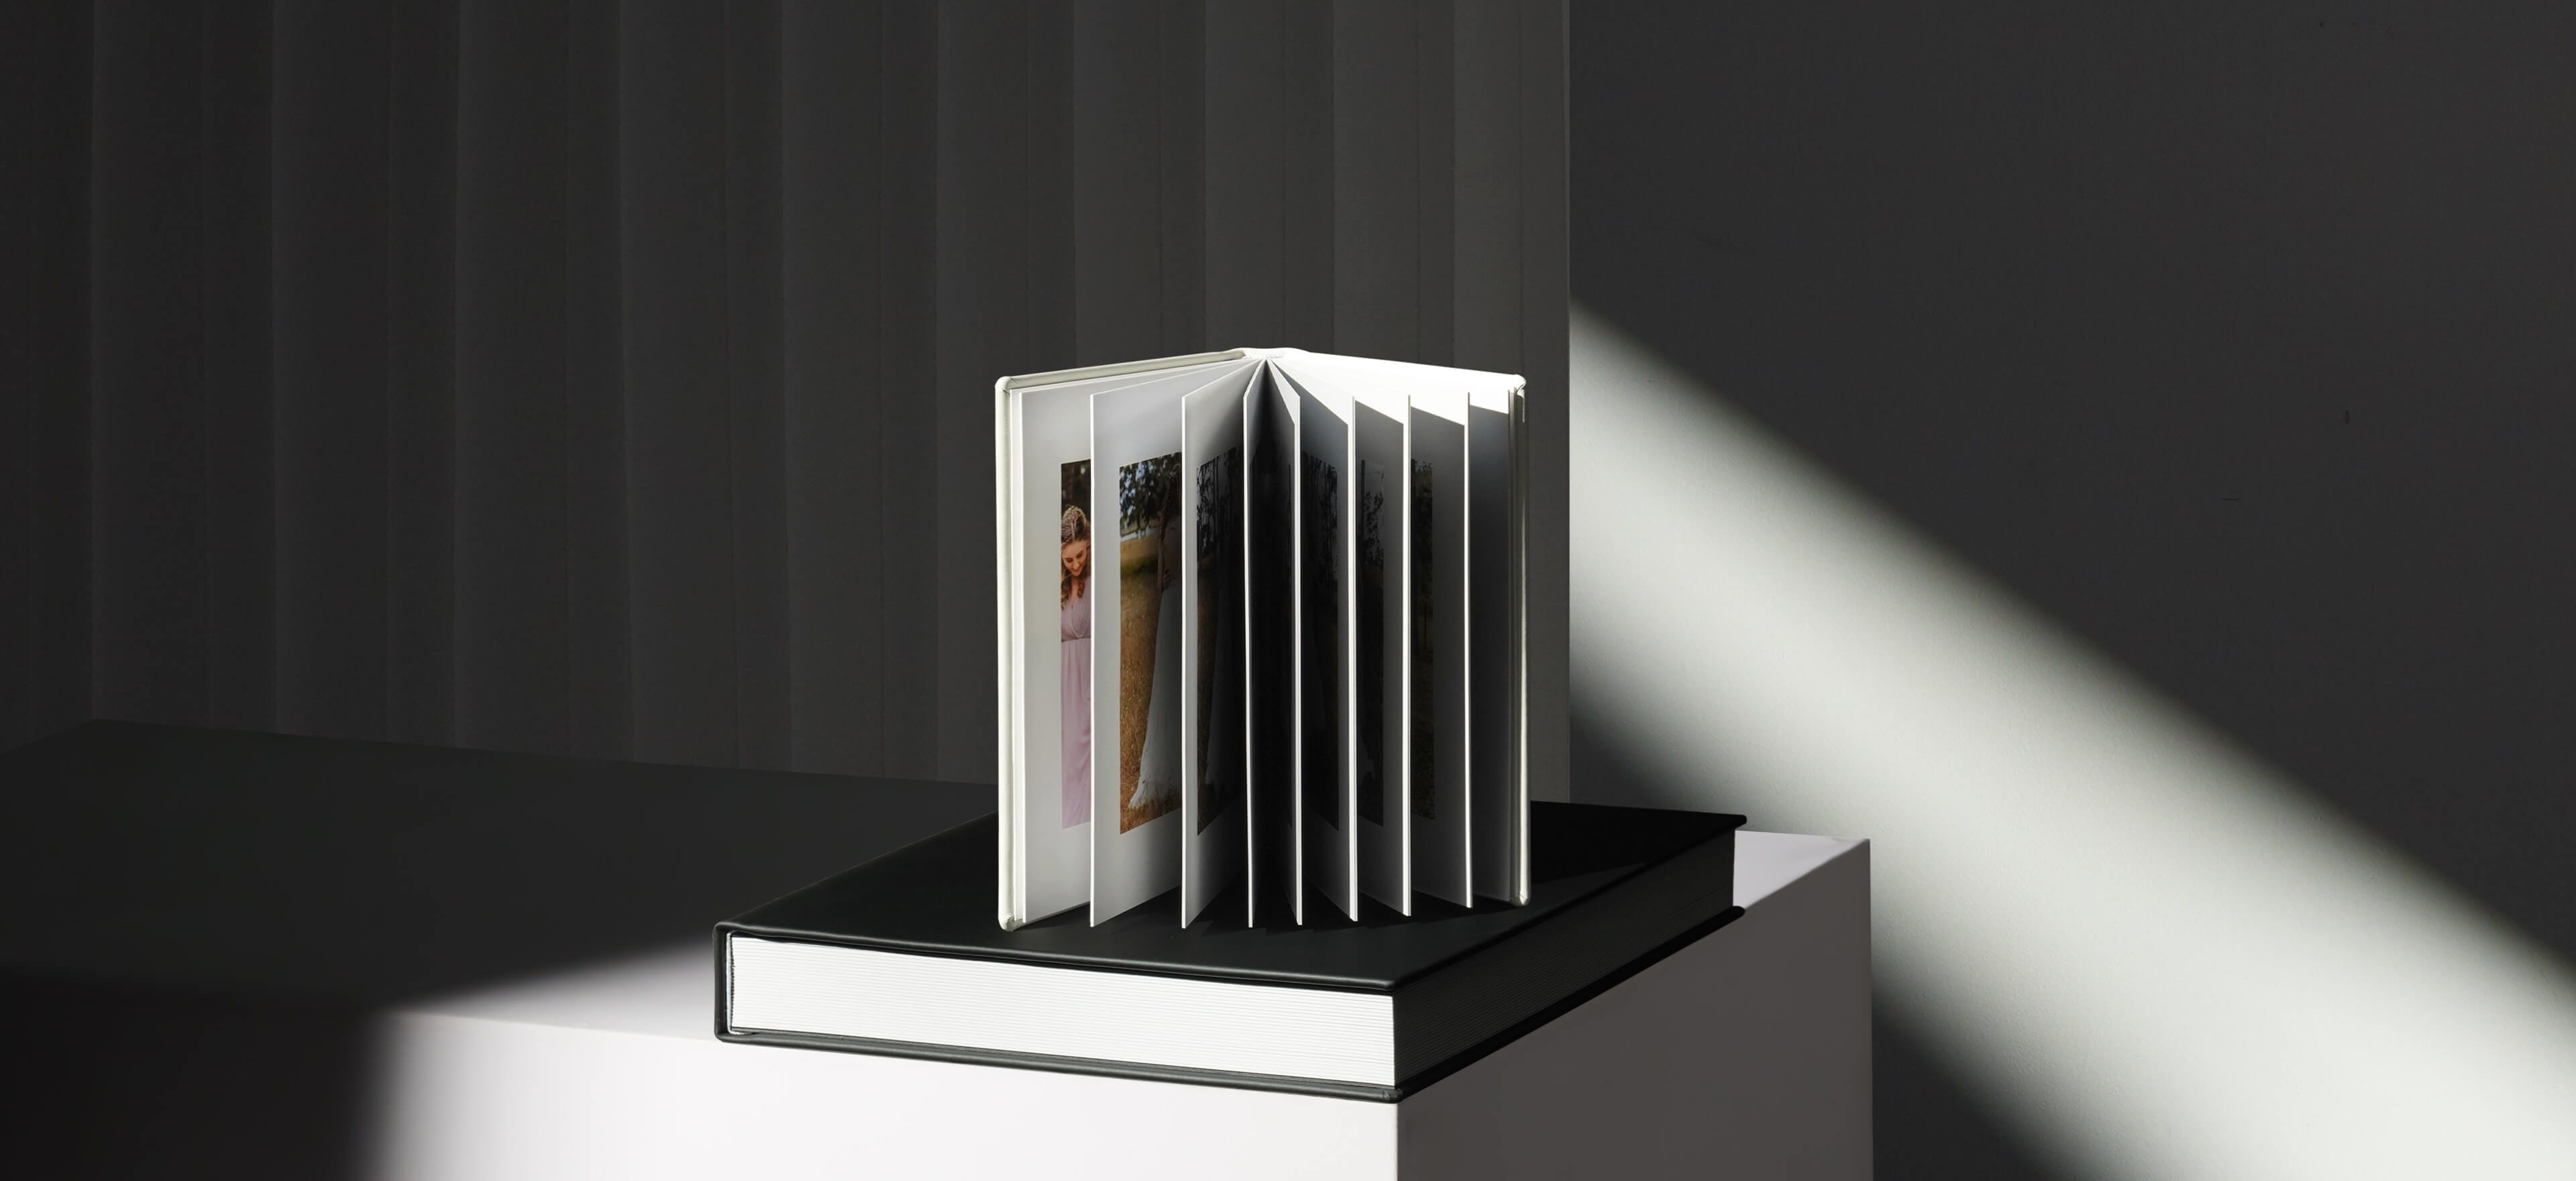 one flush mount album standing on top of another flush mount album with the pages fanned open